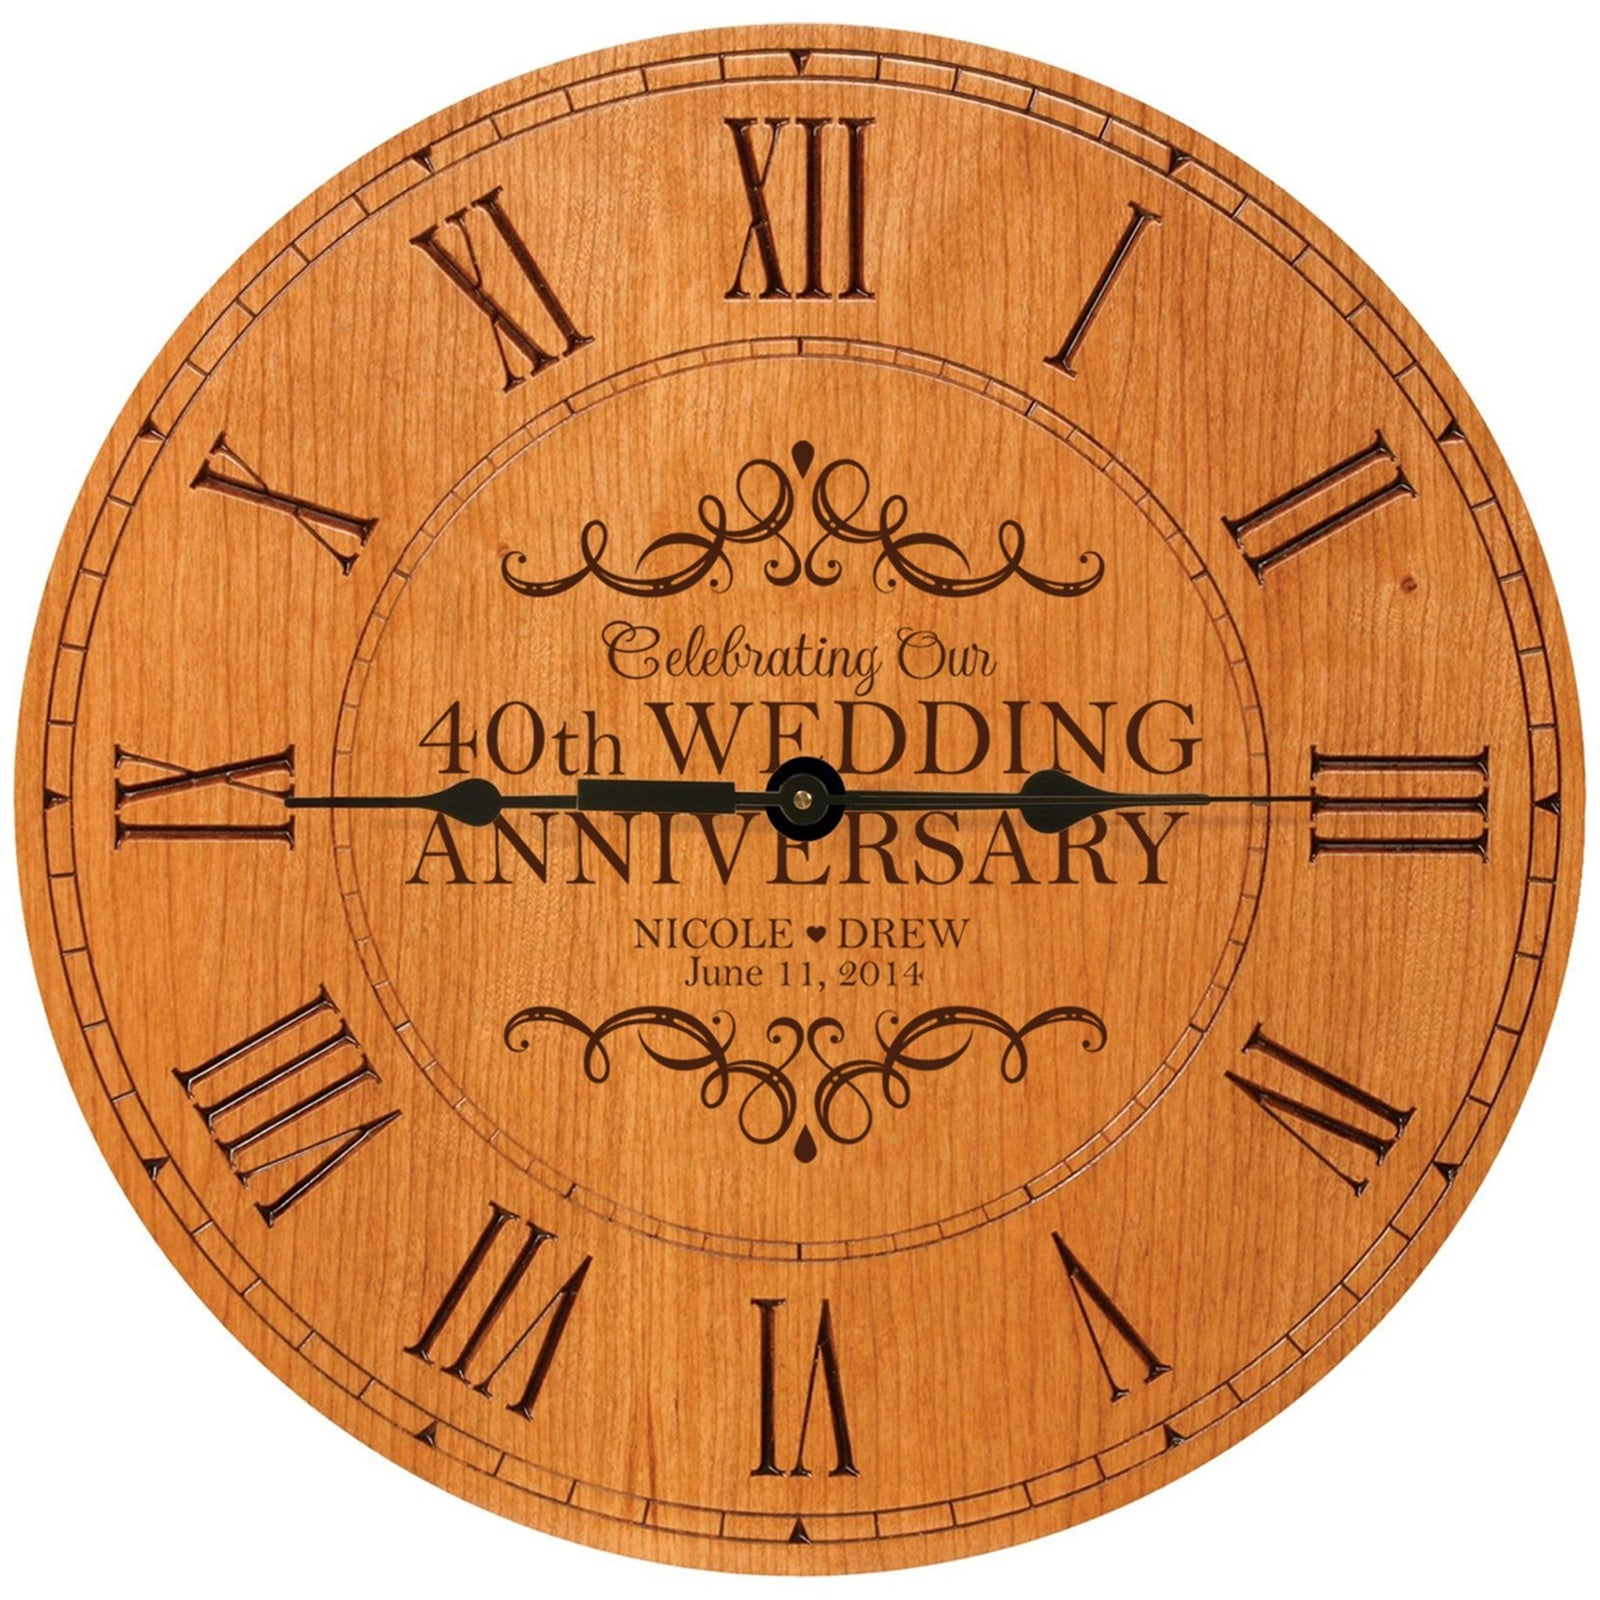 Lifesong Milestones Personalized Engraved Wooden Wall Clock for 40th Wedding Anniversary Gift Ideas